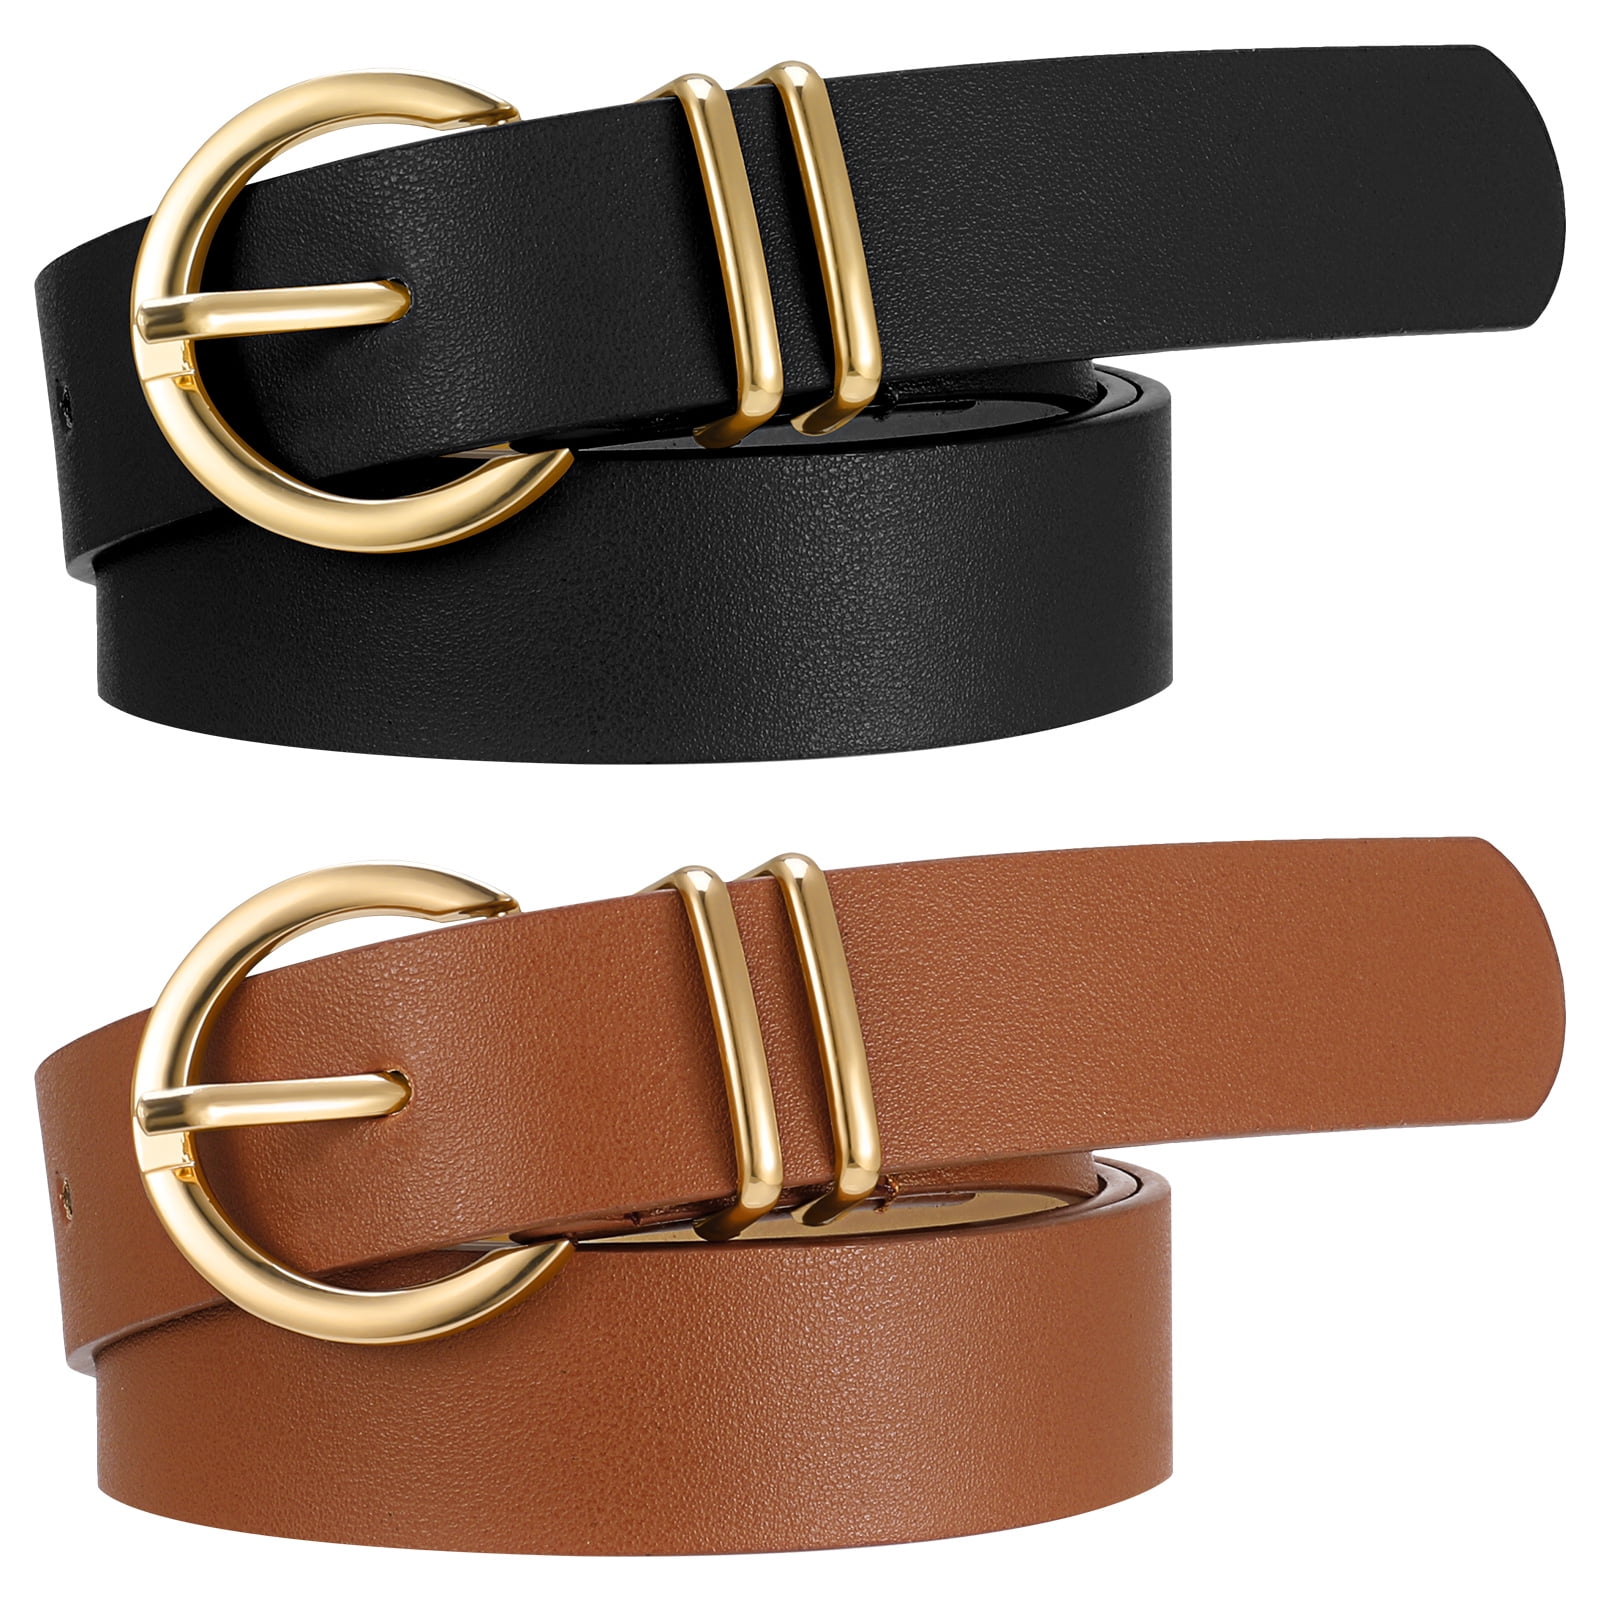 sixwipe 2 Pack Women's Leather Belts for Jeans Pants Dresses, Gold ...